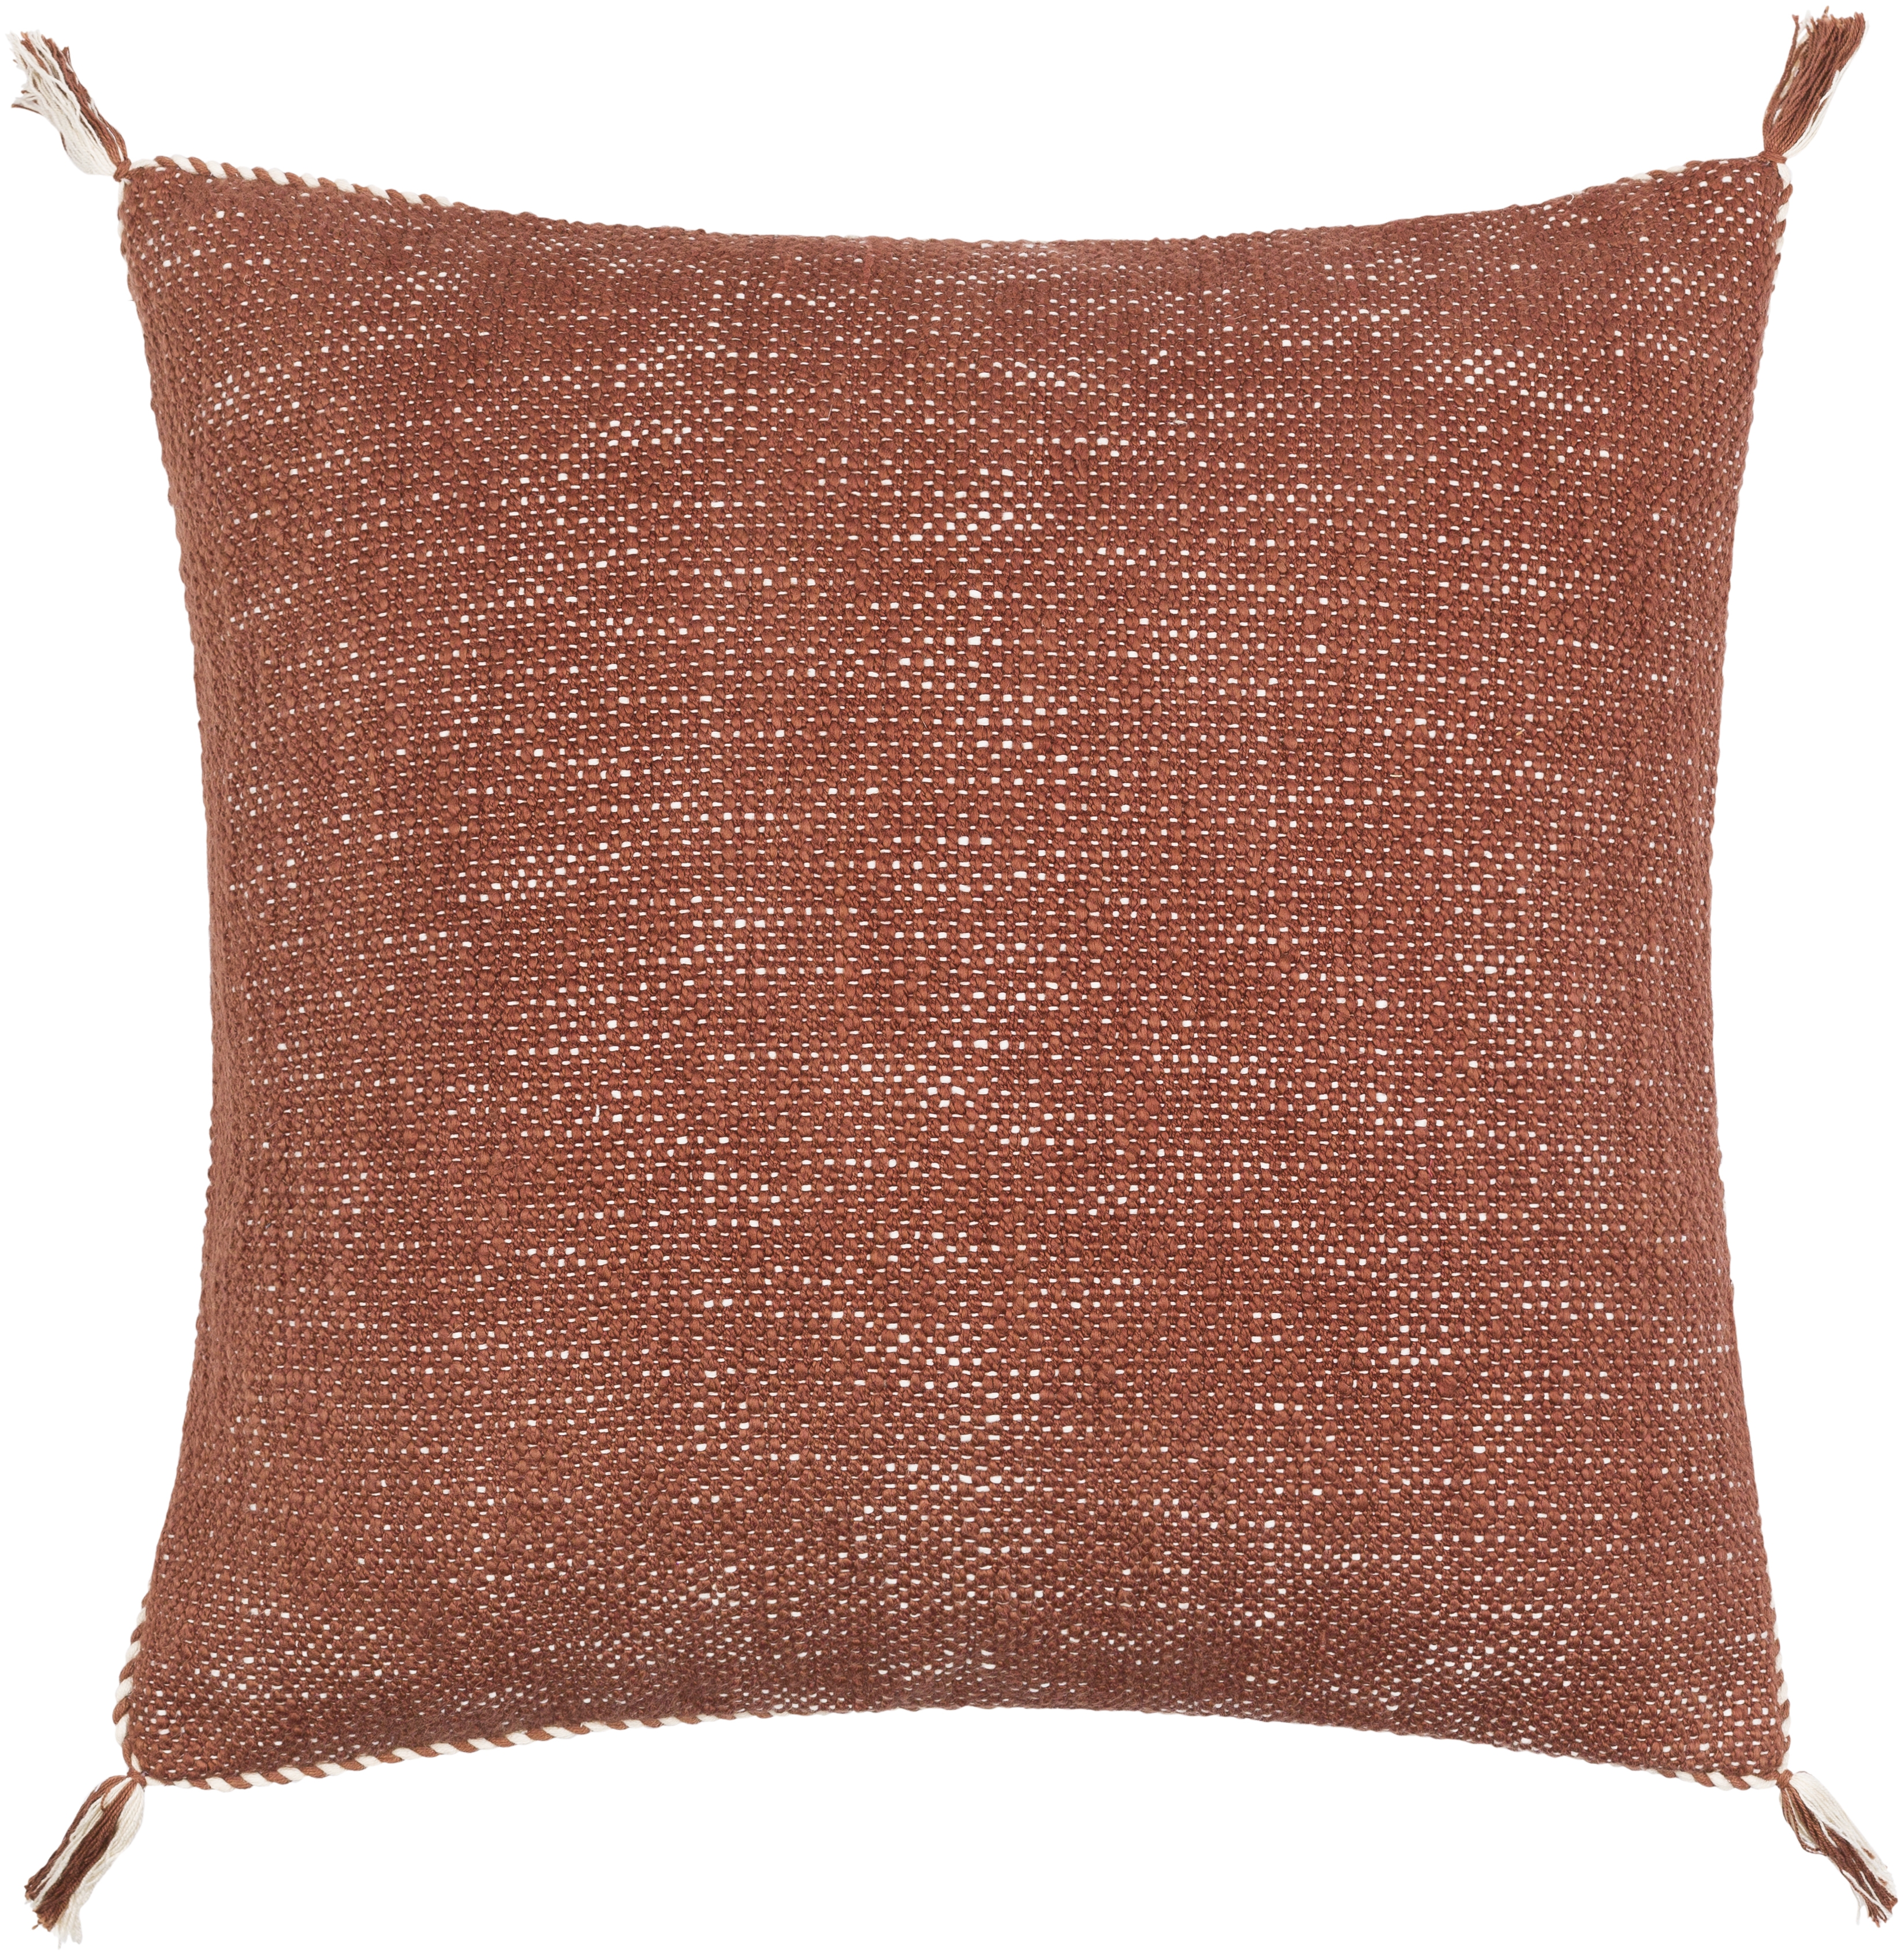 Braided Bisa Throw Pillow, 20" x 20", with down insert - Image 0